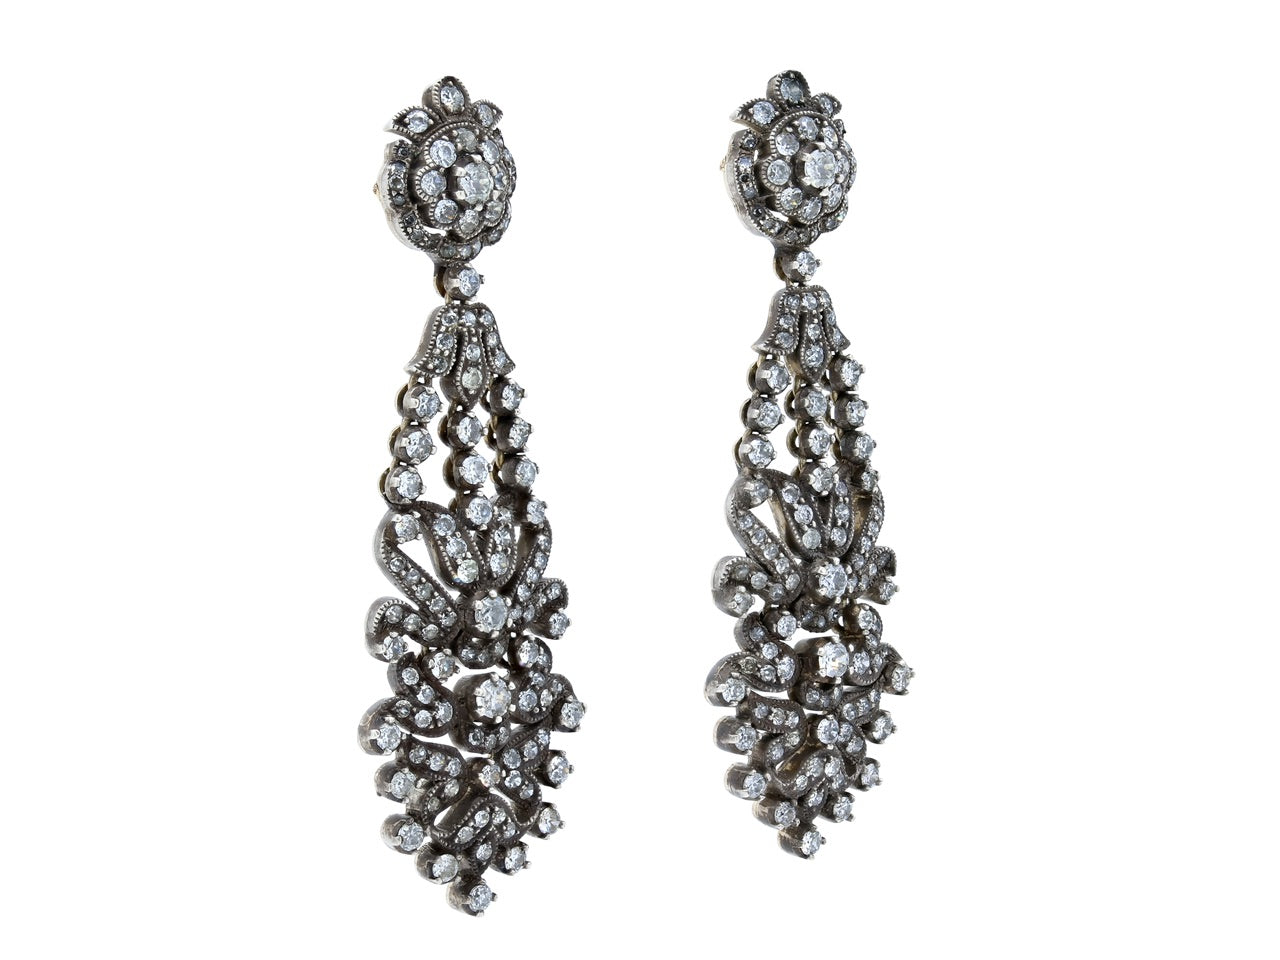 Antique-Style Diamond Chandelier Earrings in Silver over Gold